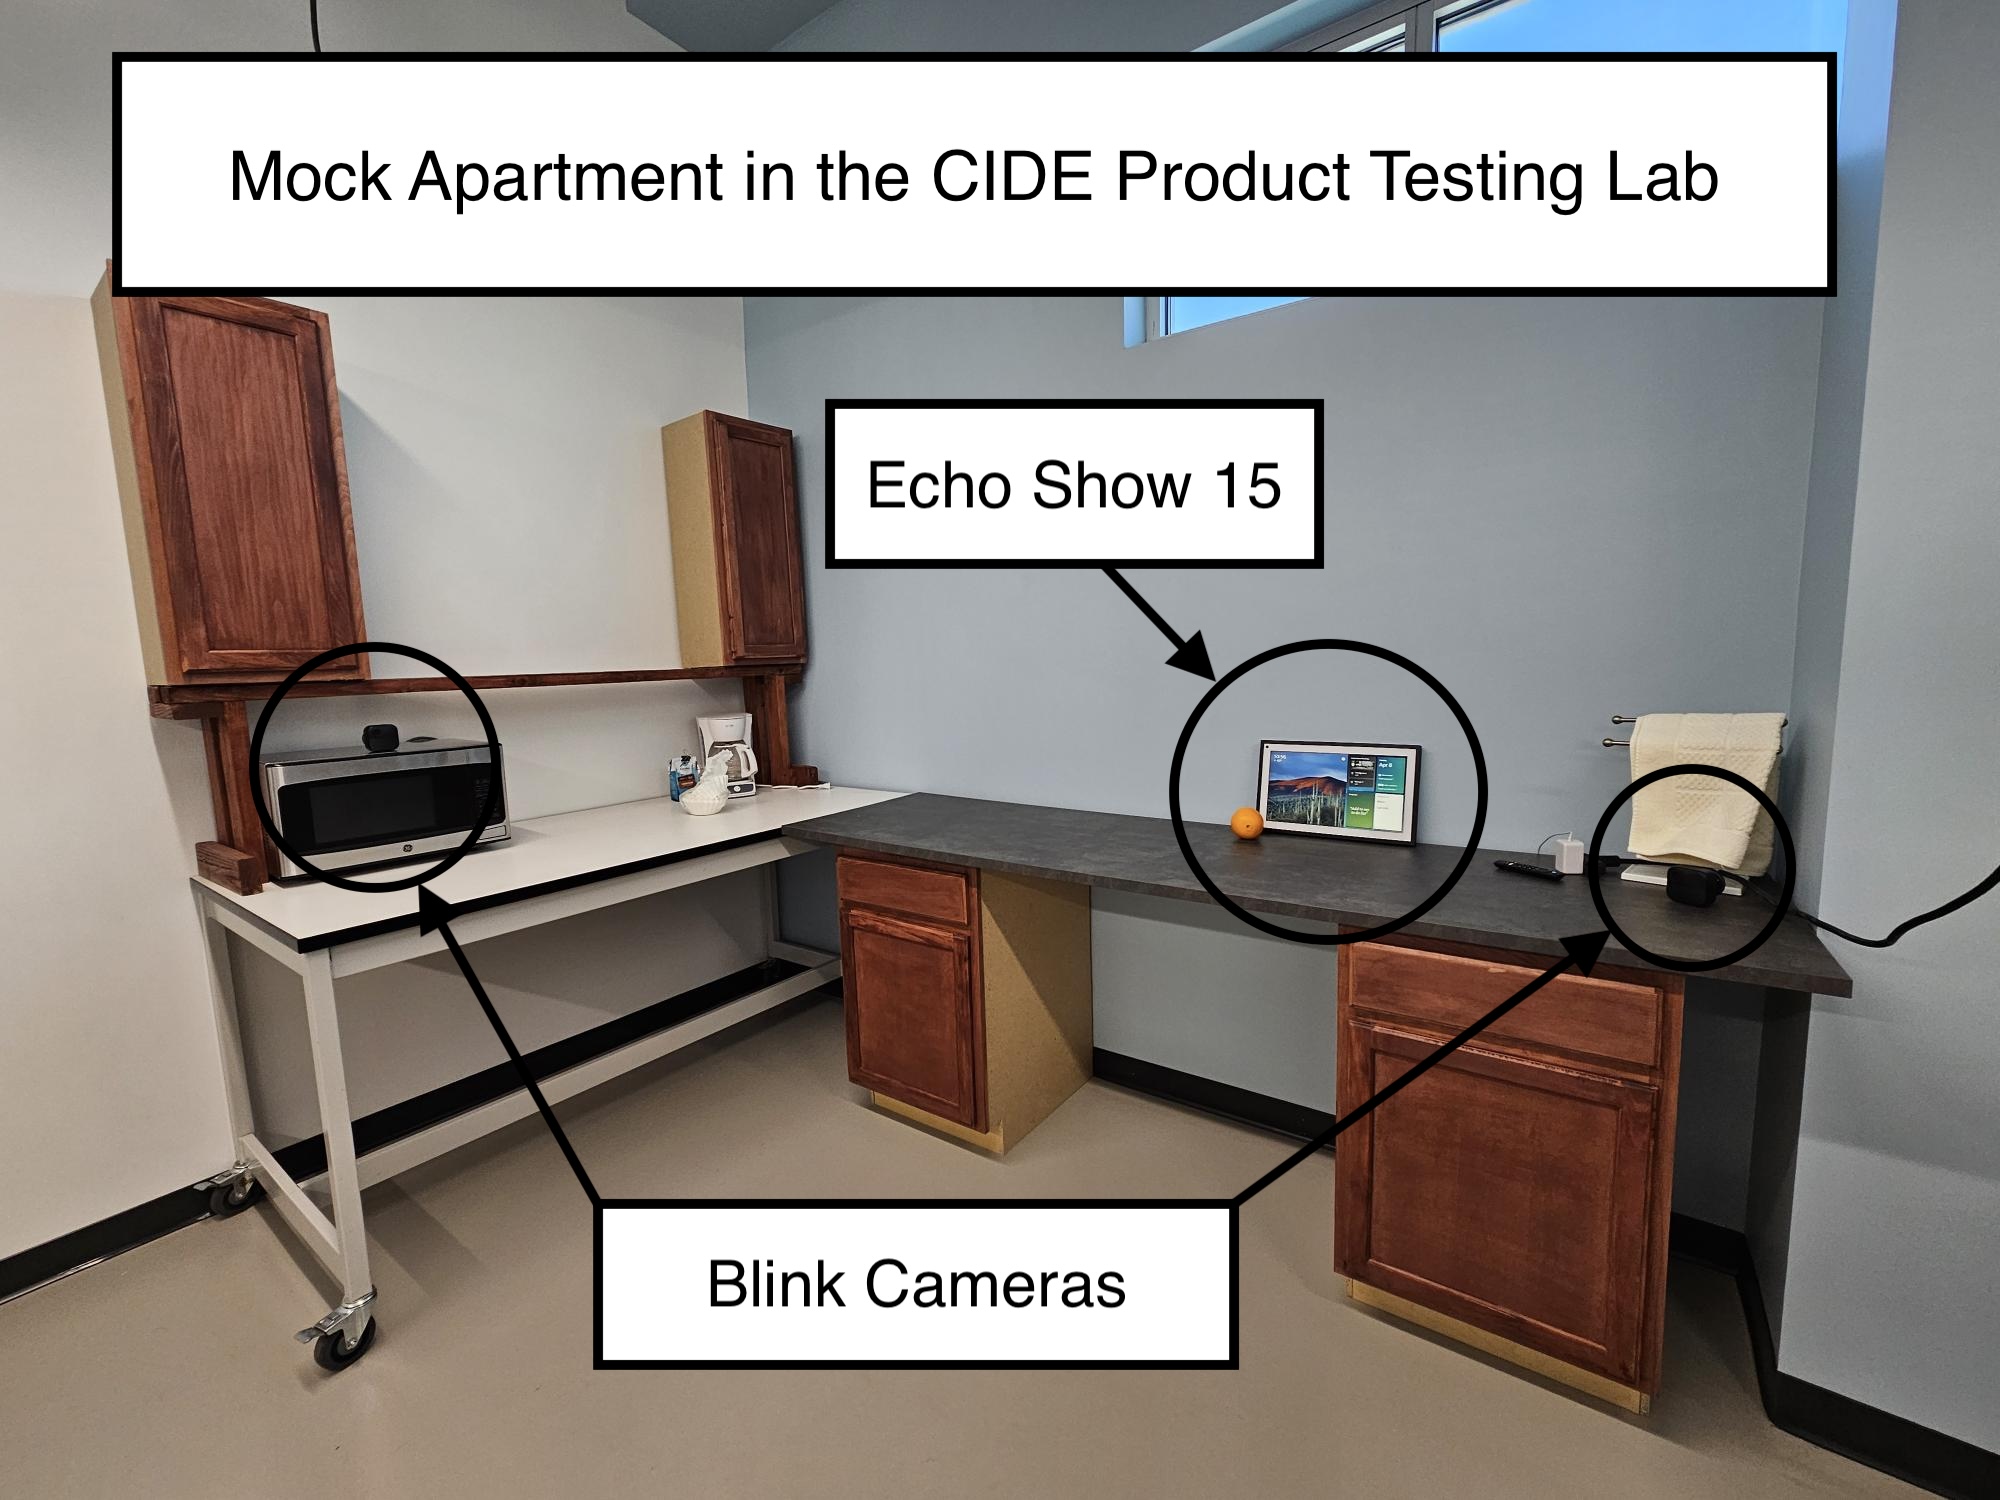 Mock apartment in the CIDE Product testing lap with arrows pointing to the Echo Show 15 tablet and two small Blink Cameras.